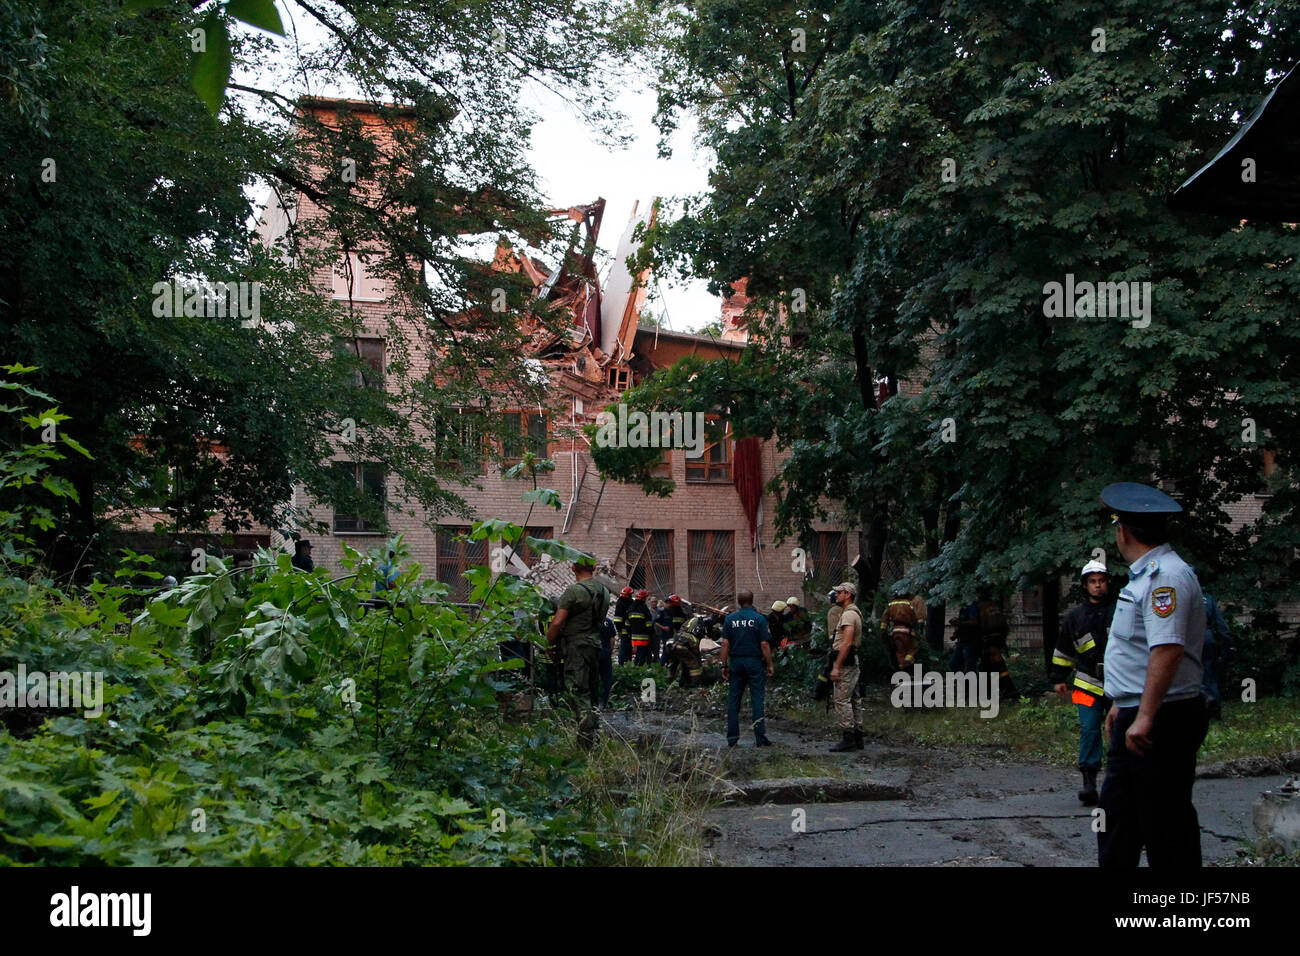 Donetsk, Ukraine. 29th June, 2017. Firefighters work at the site where an explosion occurred in Donetsk, Ukraine, on June 29, 2017. An explosion occurred in central Donetsk on Thursday. Credit: Alexander Ermochenko/Xinhua/Alamy Live News Stock Photo